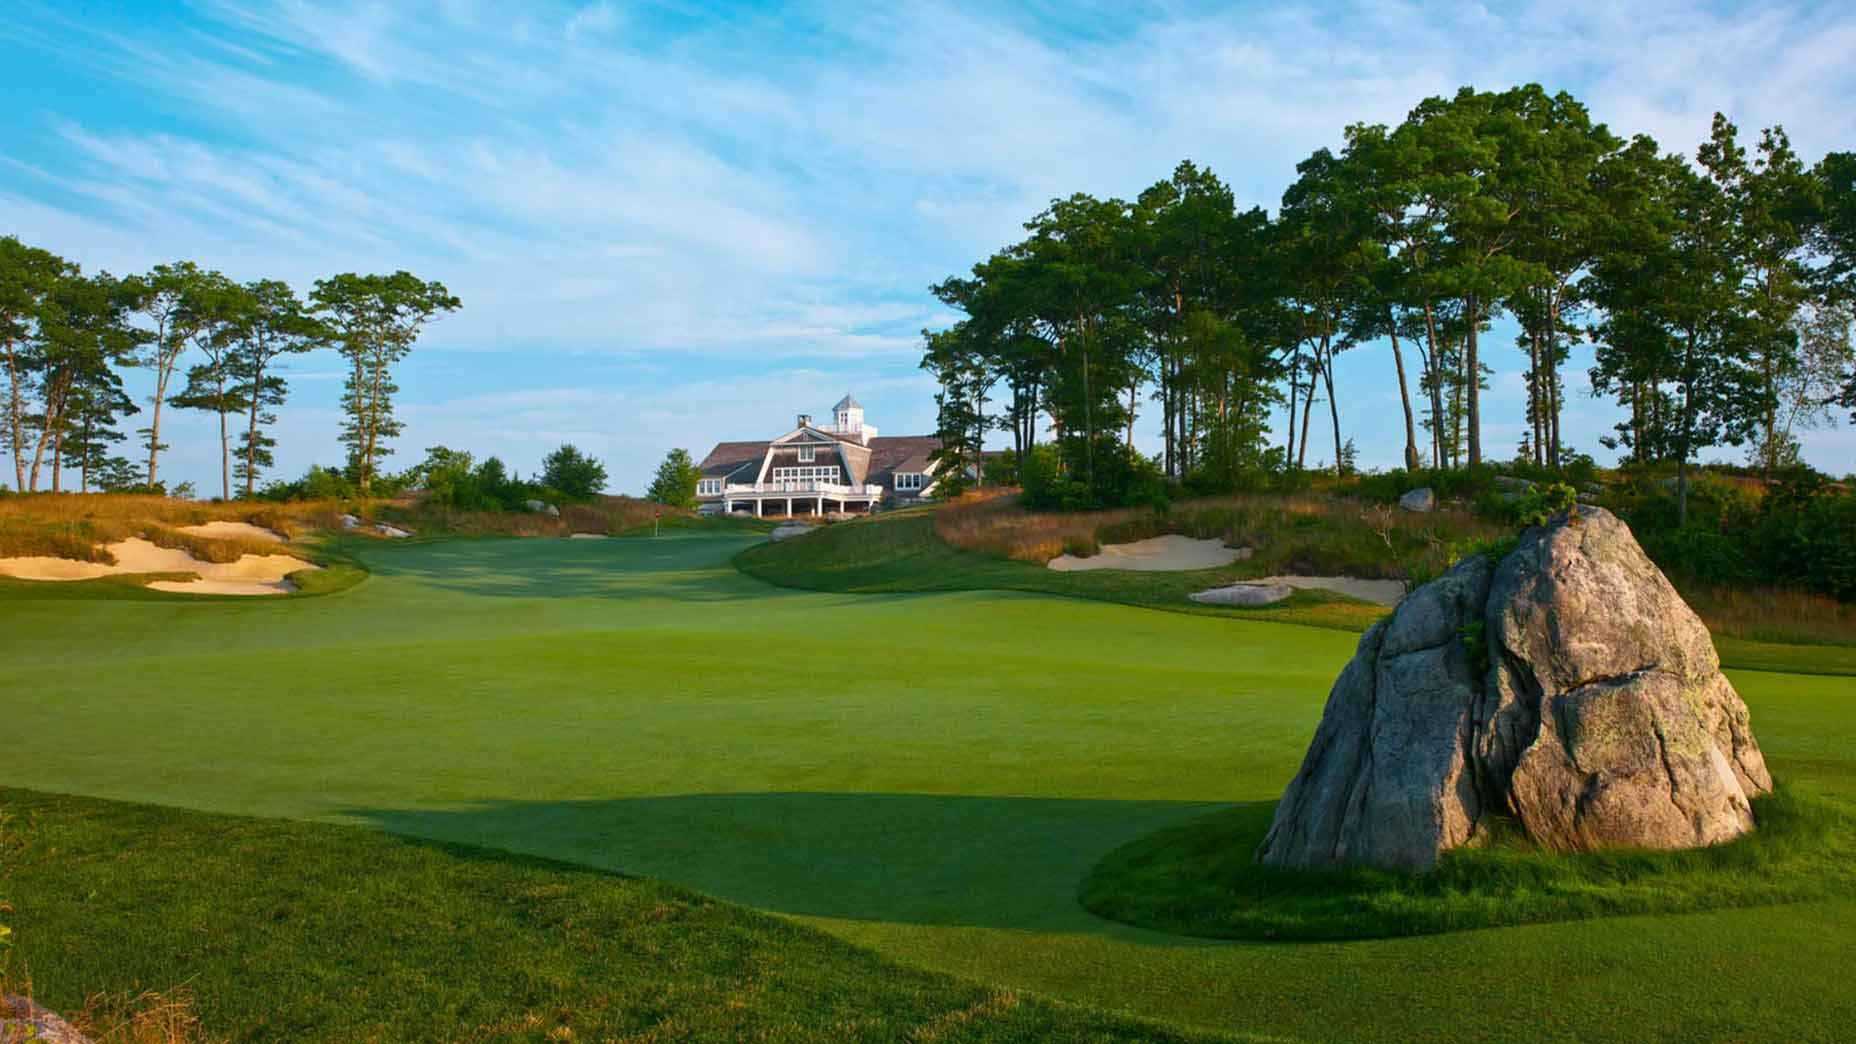 The best golf courses in Rhode Island, according to GOLF Magazine’s expert course raters